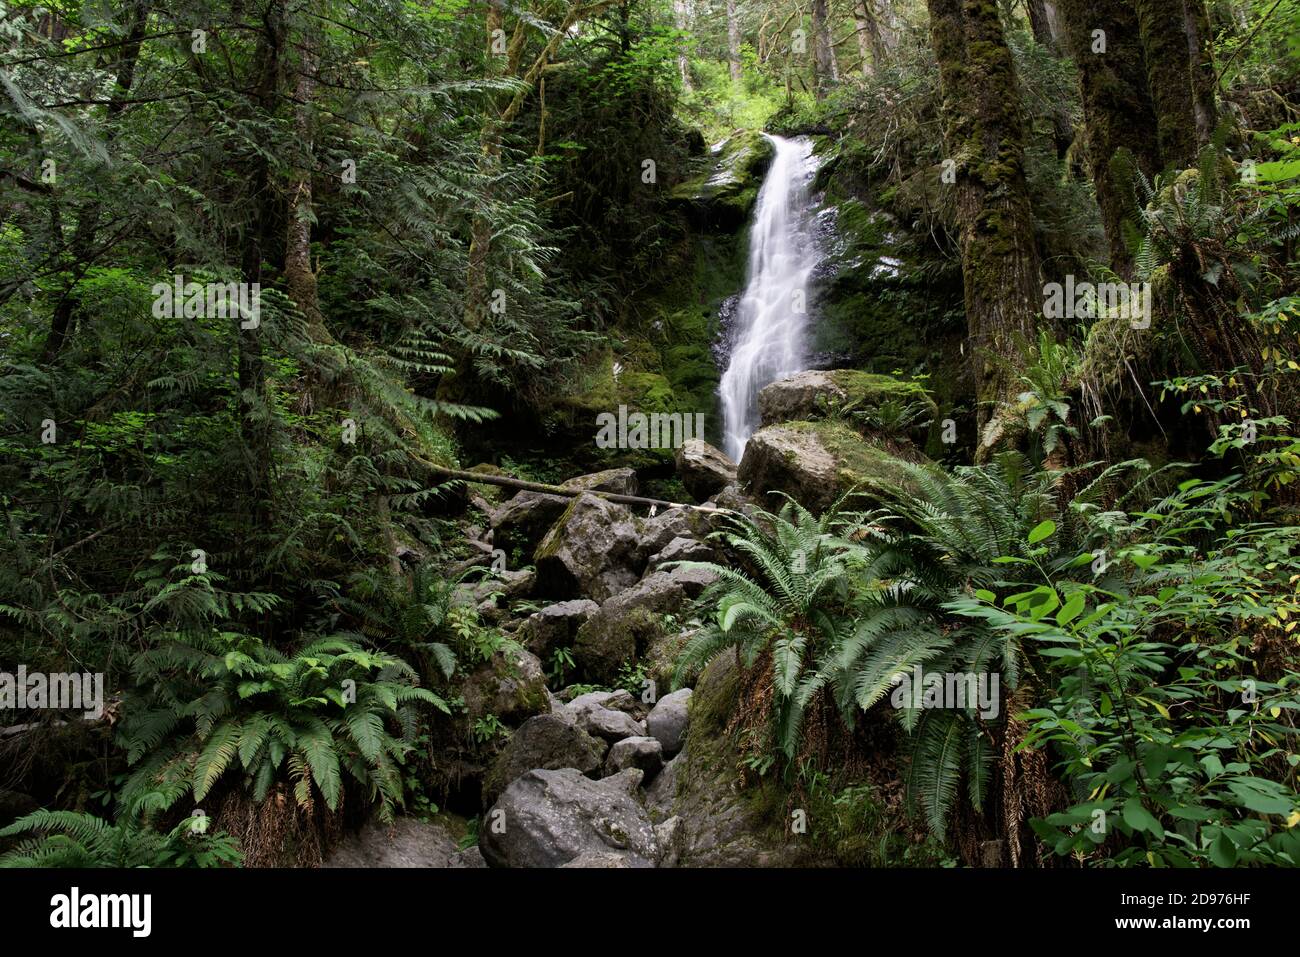 North American temperate rainforest, Quinault Valley, Washington. Stock Photo